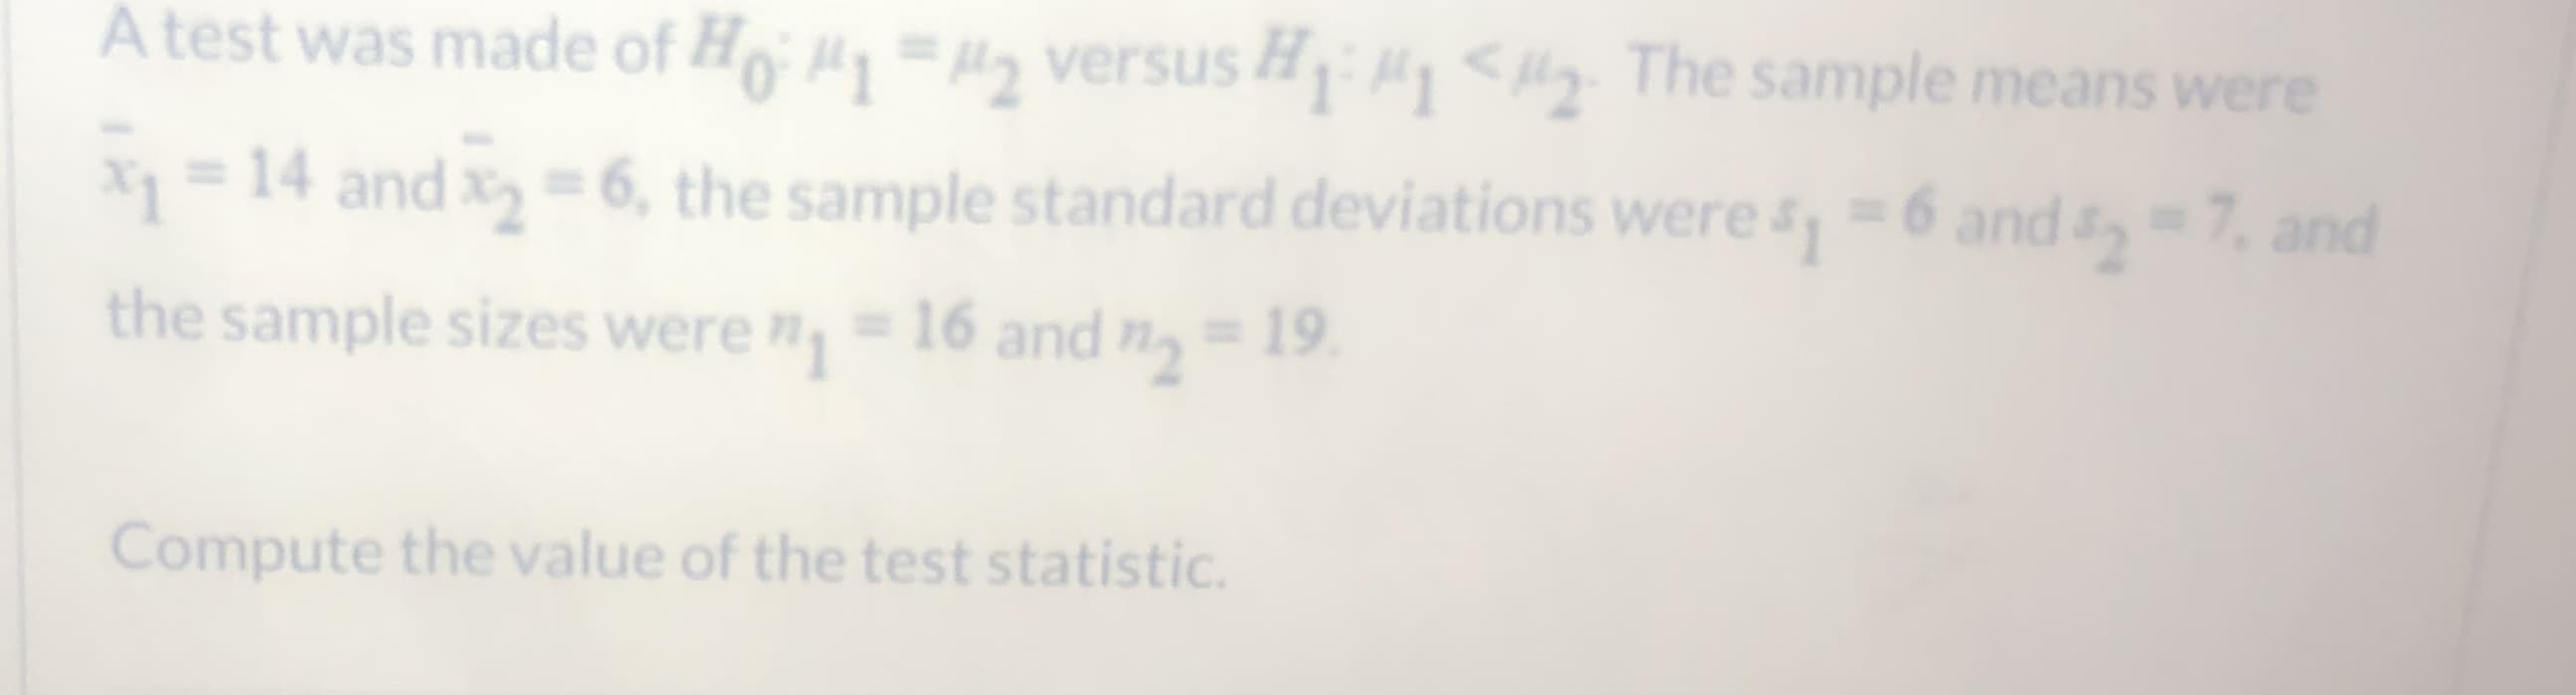 A test was made of H = H versus H < lly The sample means were
X=14 and 6, the sample standard deviations were 6 and -7. and
the sample sizes were 16 and n 19
Compute the value of the test statistic.
